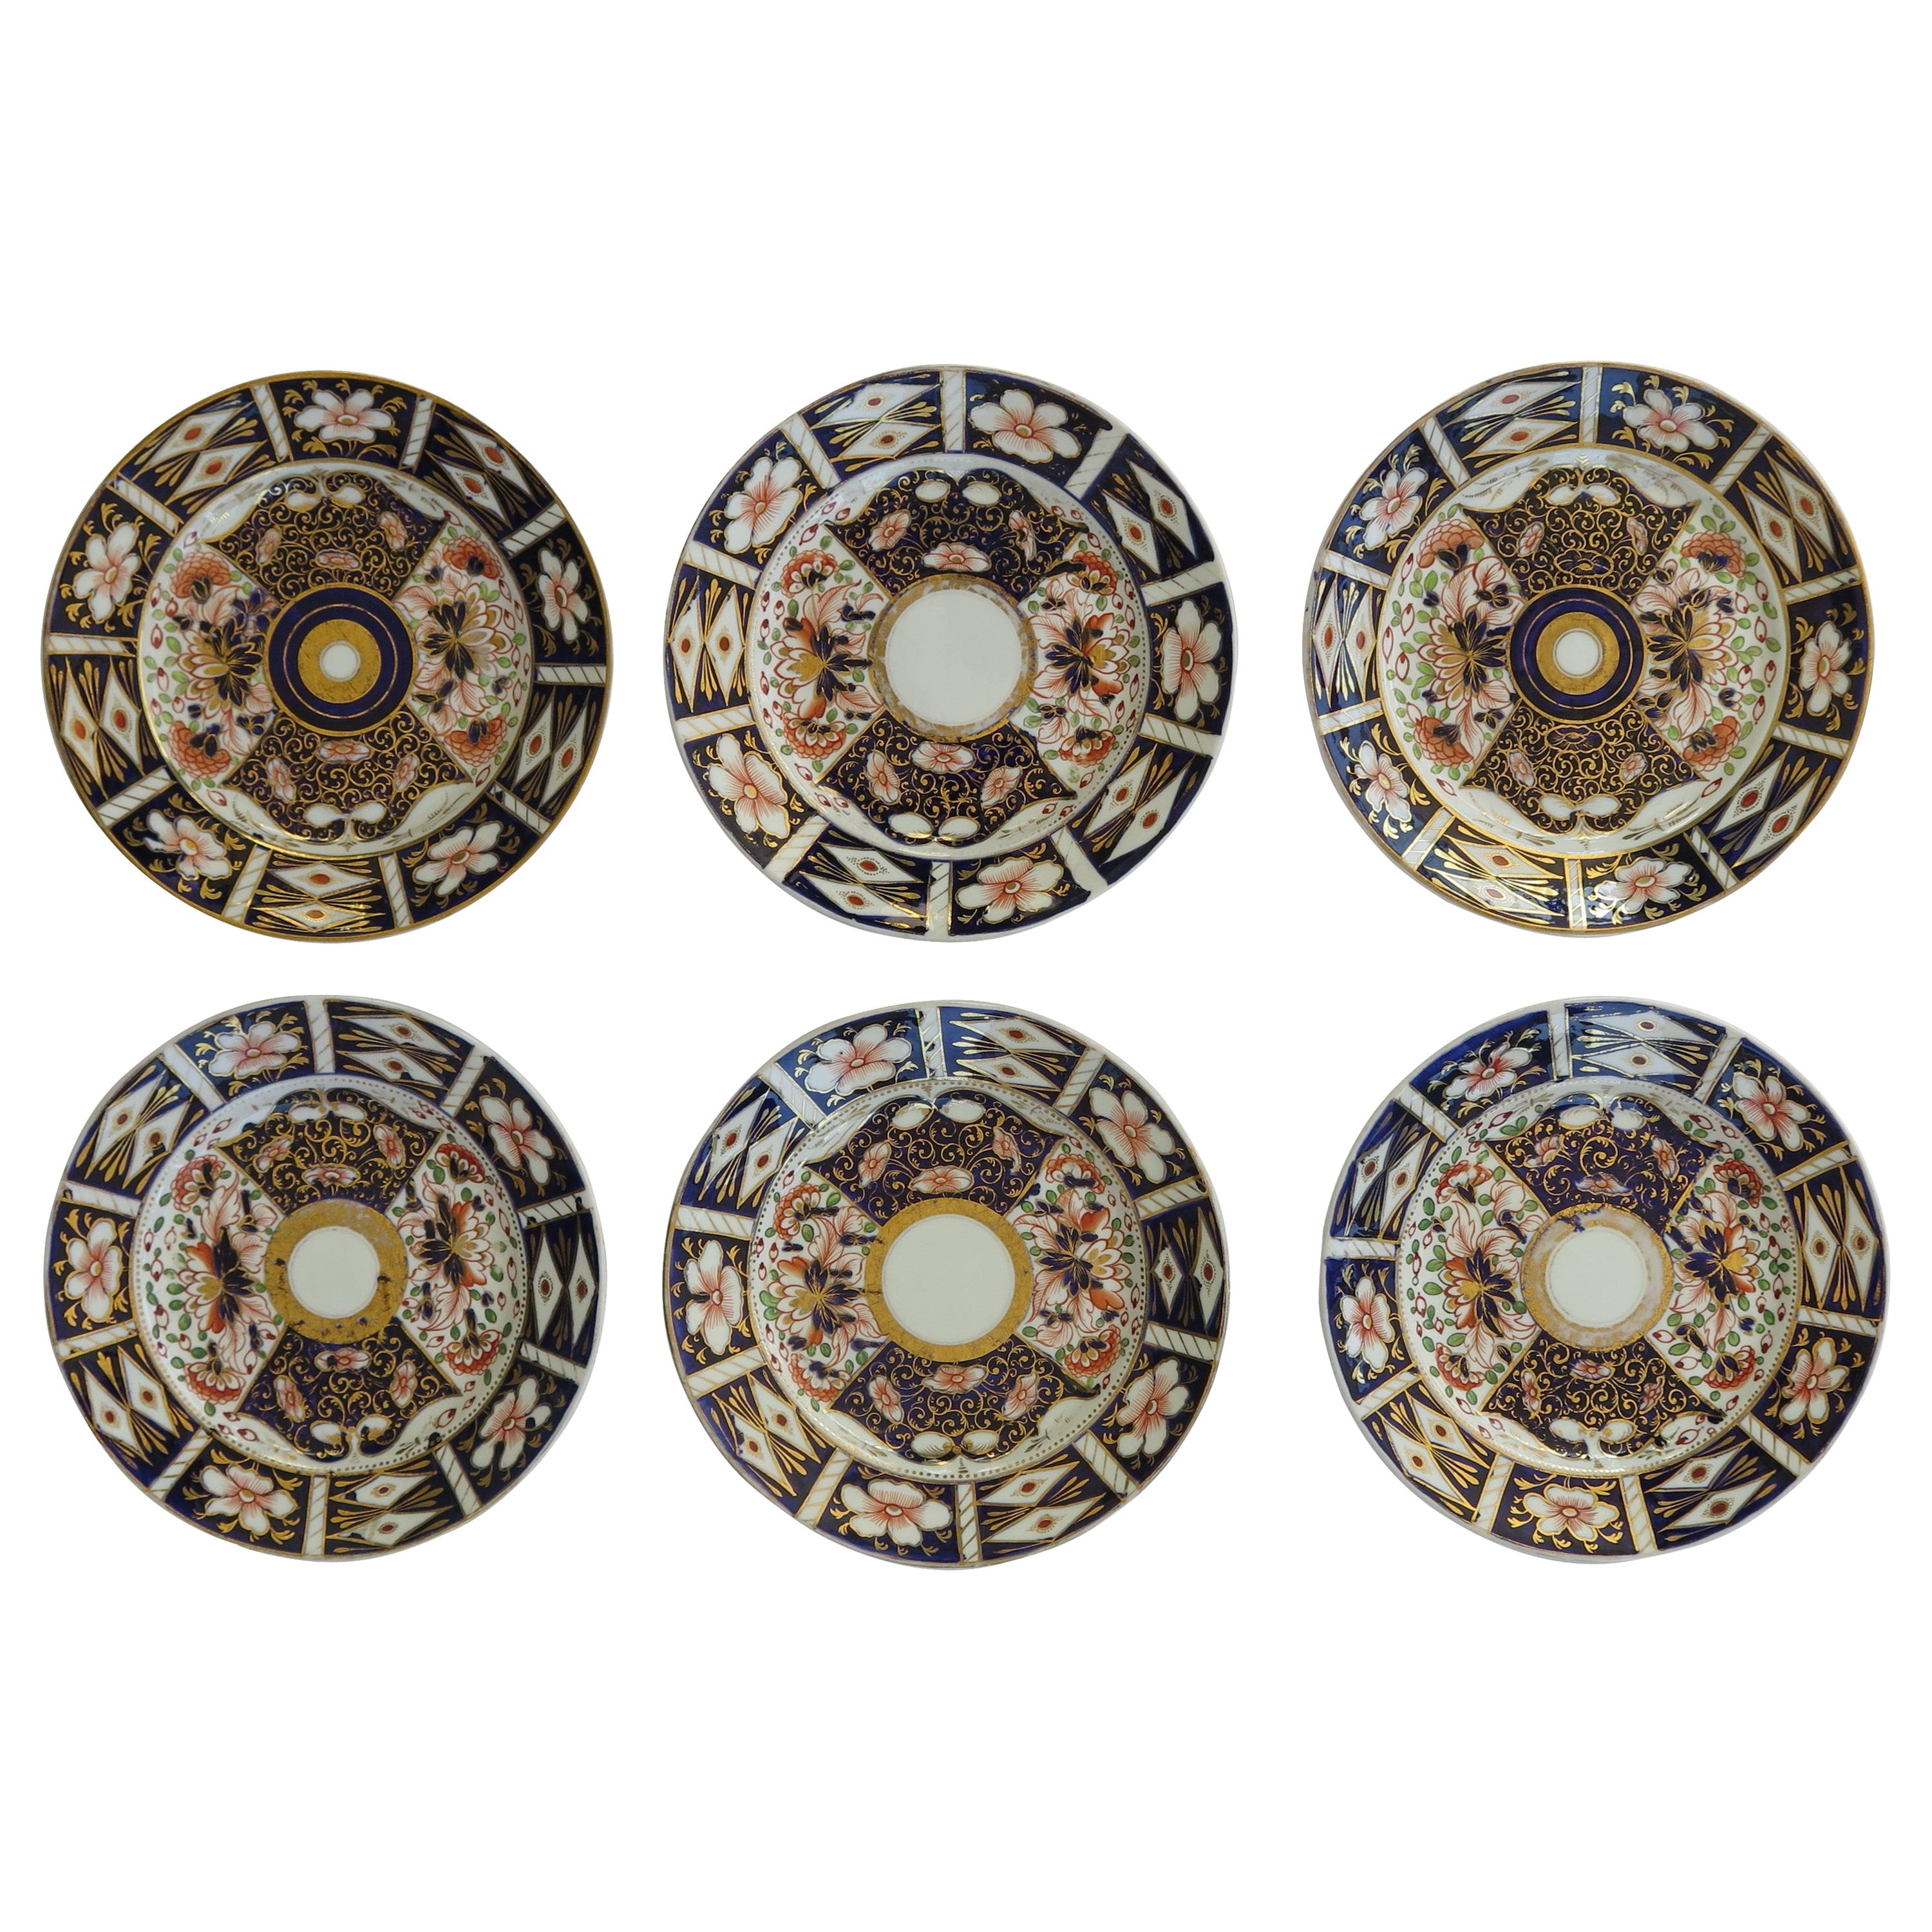 SIX Davenport Porcelain Plates Hand Painted and Gilded Pattern, Circa 1870 For Sale